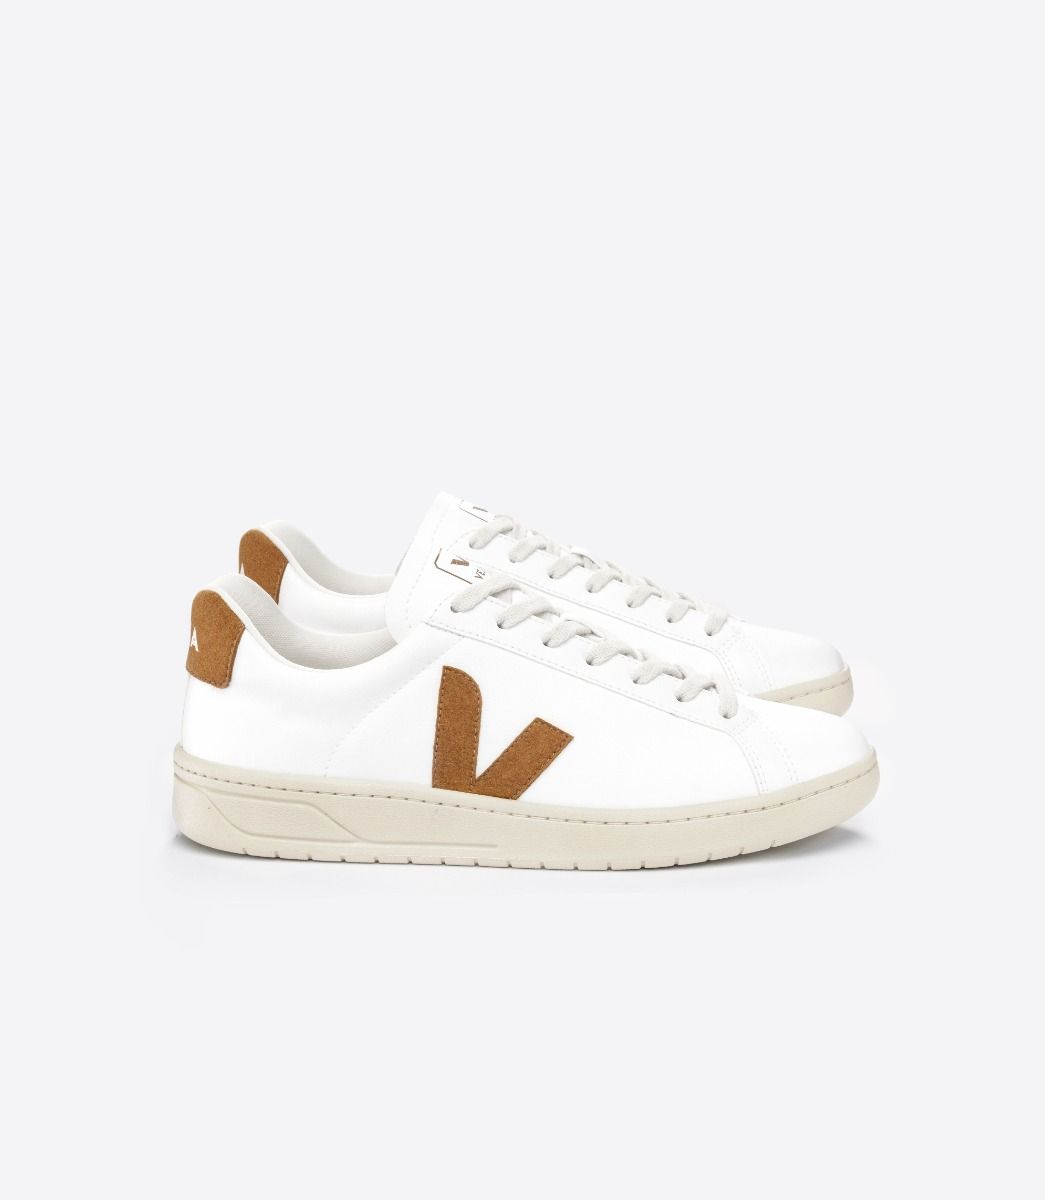 VEJA sneakers are produced in high-standard factories in Brazil. The logistics of VEJA stores in Europe and e-commerce are managed by Log’ins, a professional and social inclusion company.